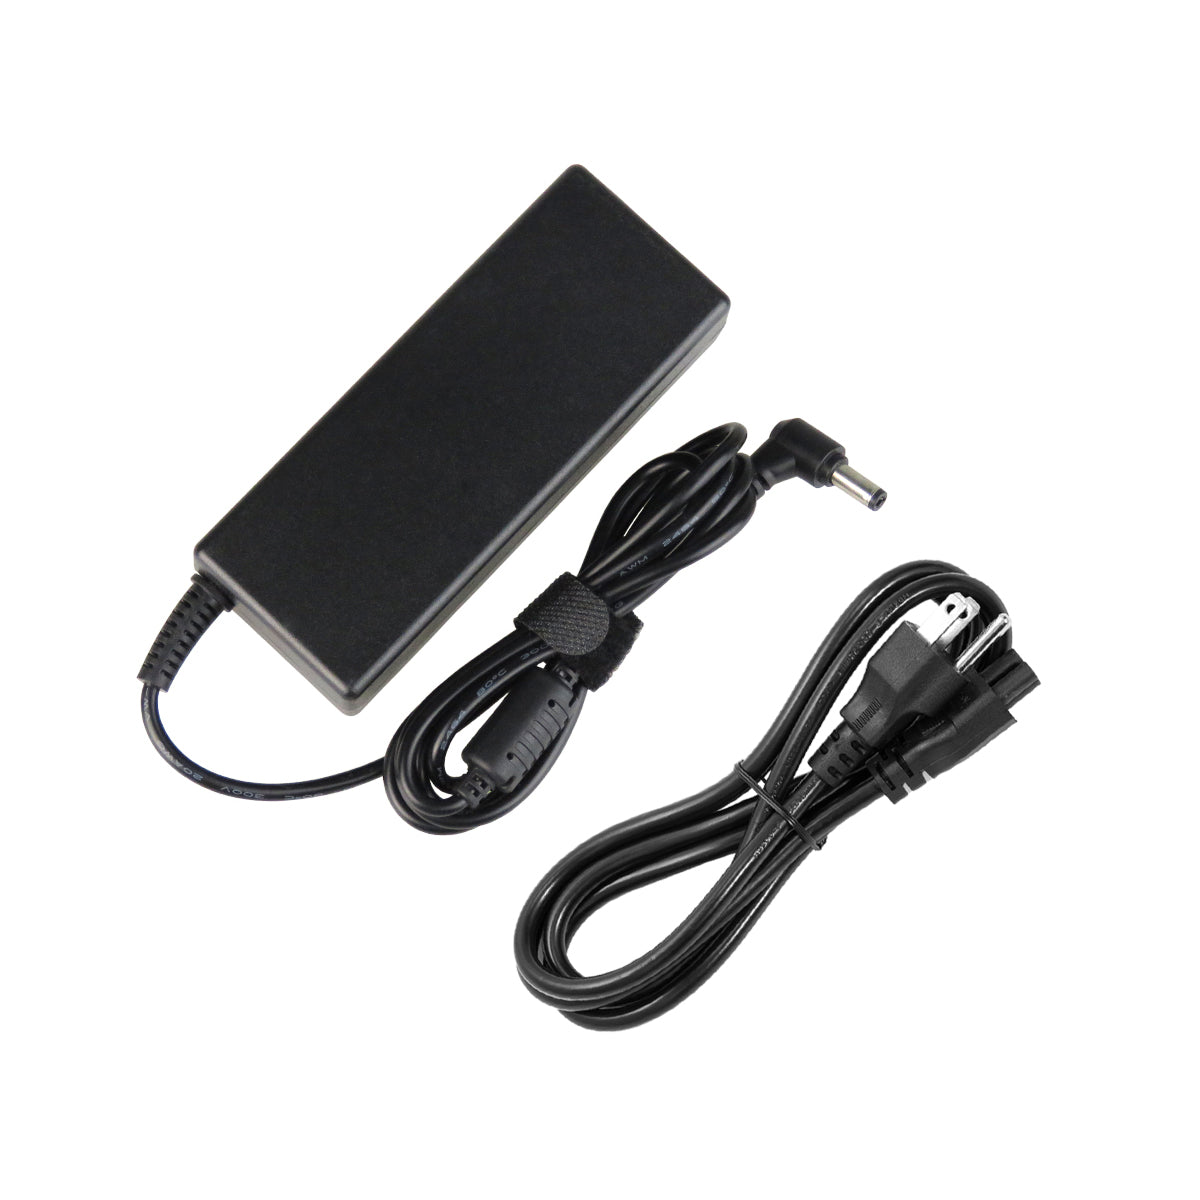 AC Adapter Charger for ASUS K55VD Laptop.